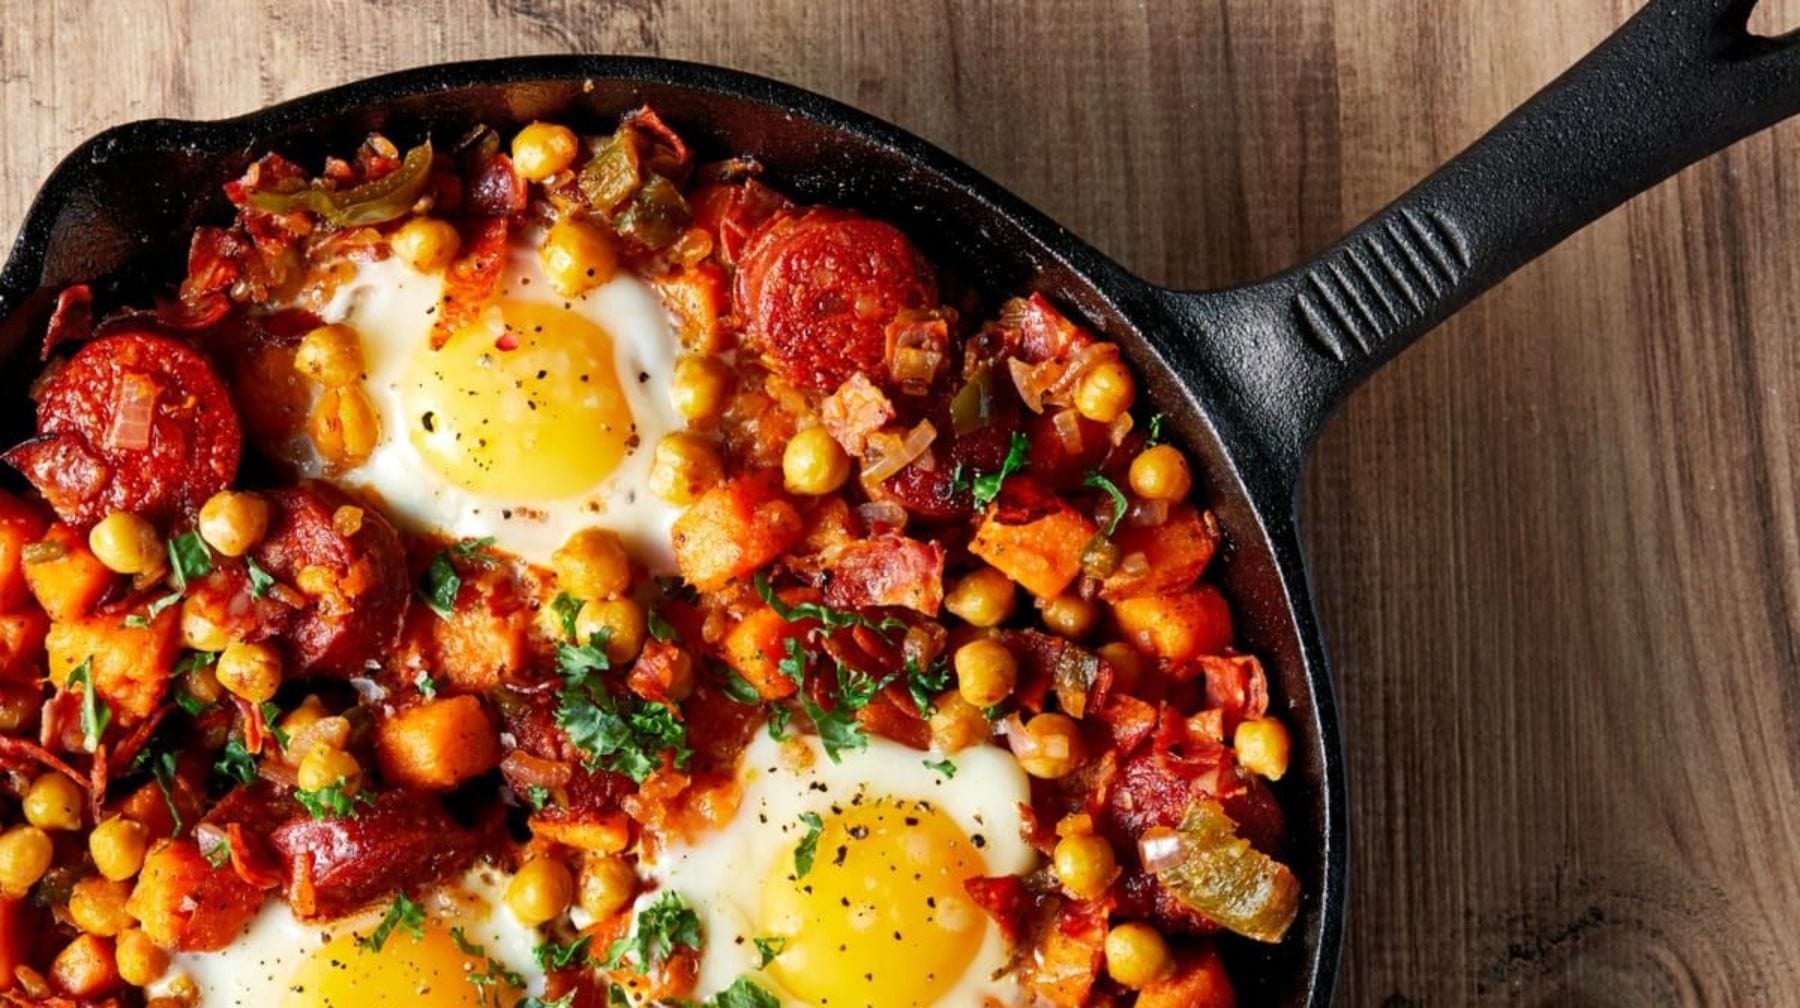 4 Egg-Based Breakfast Recipes To Crack On With This Easter